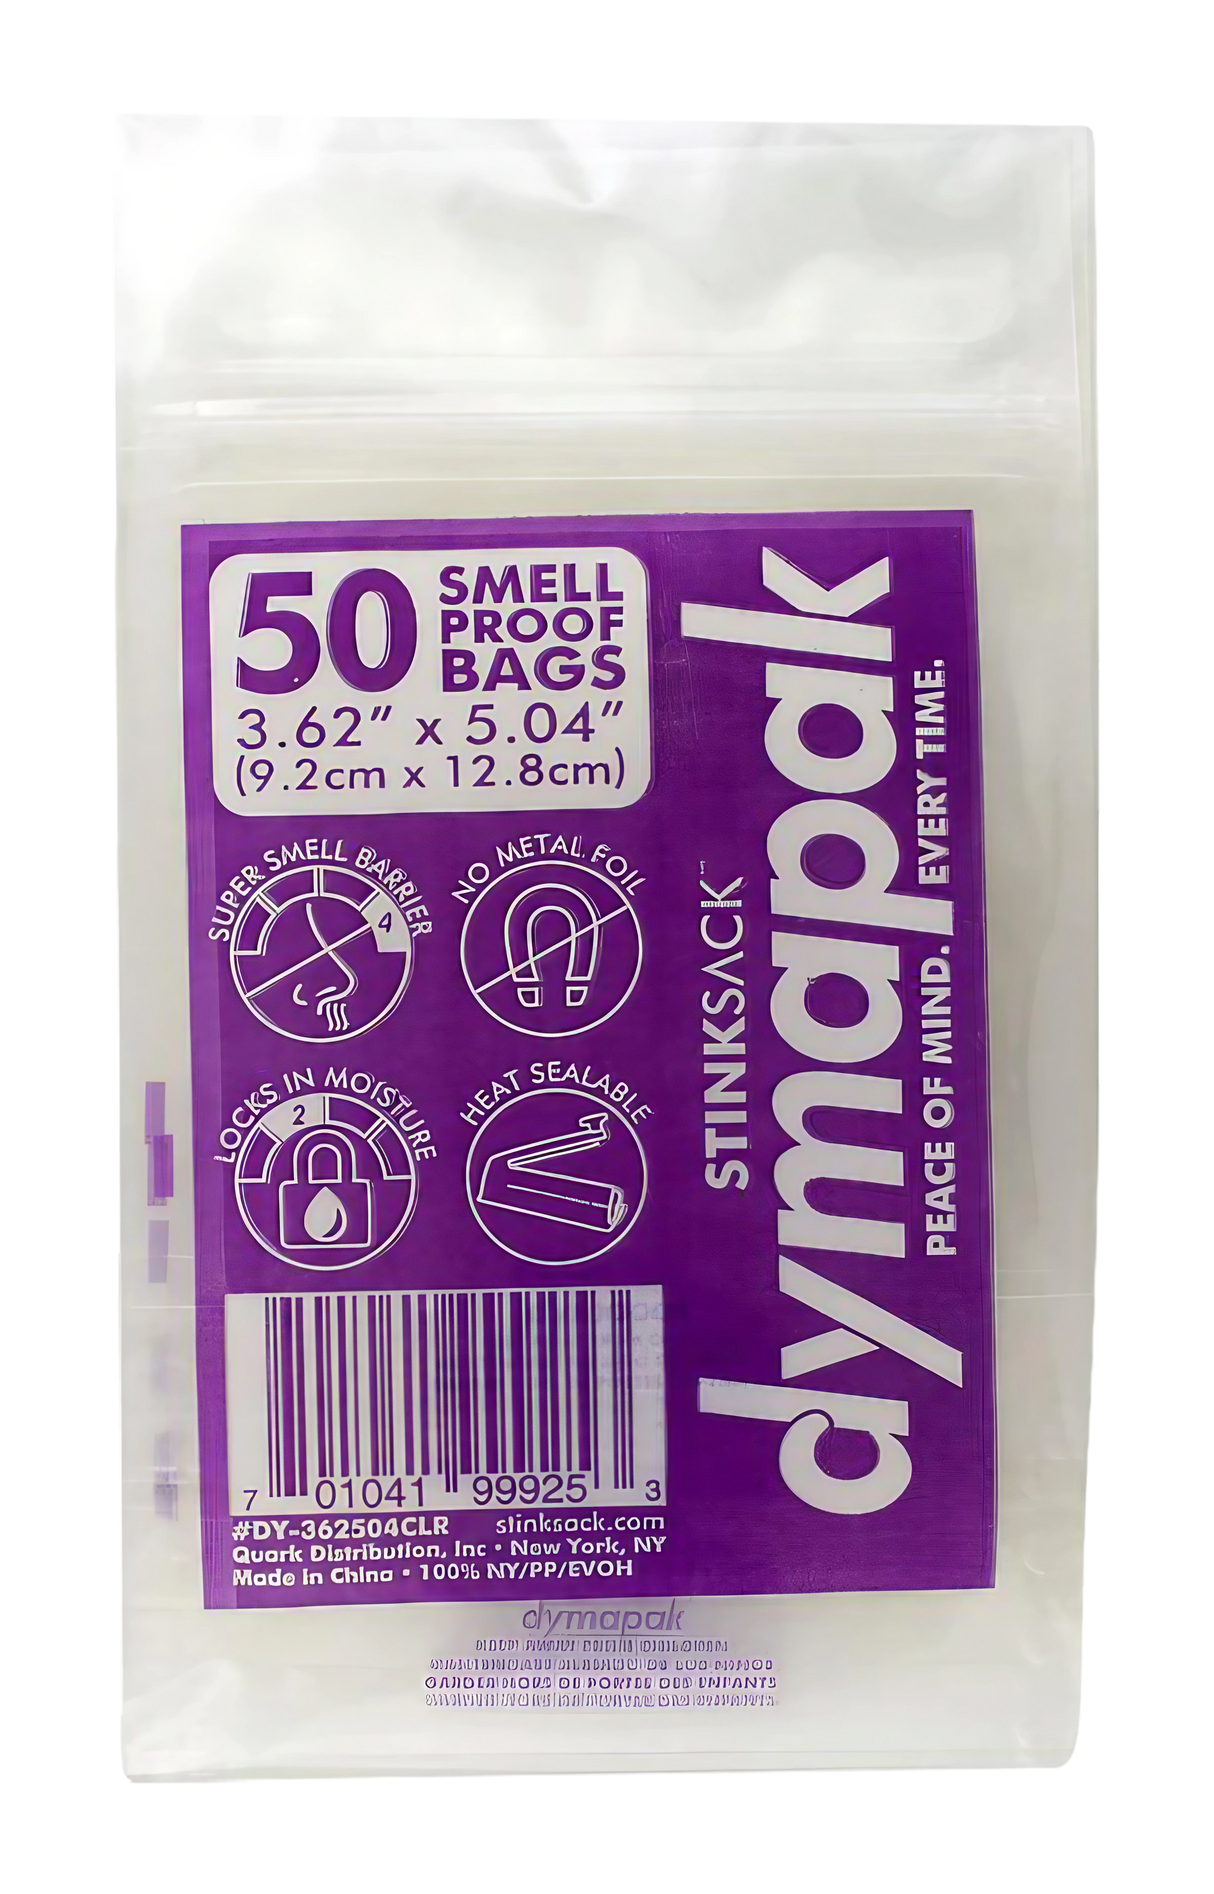 Stink Sack Dymapak Smell-Proof Storage Bags in black, front view showing features